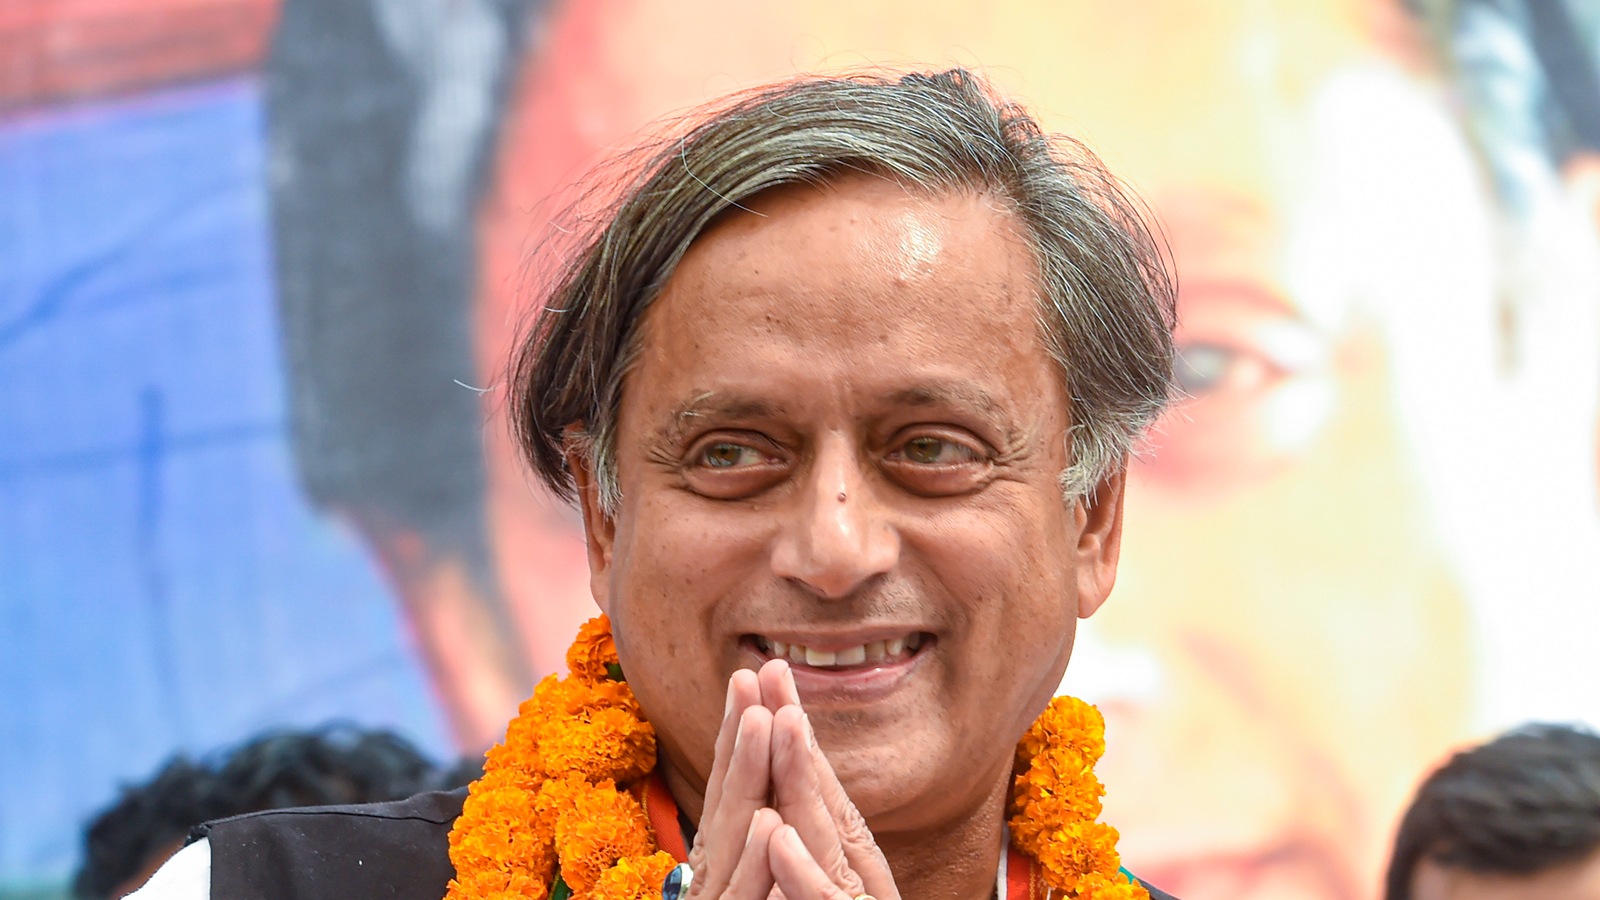 Kharge one among top 3 Congress leaders, can't bring change: Tharoor | Latest News India - Hindustan Times